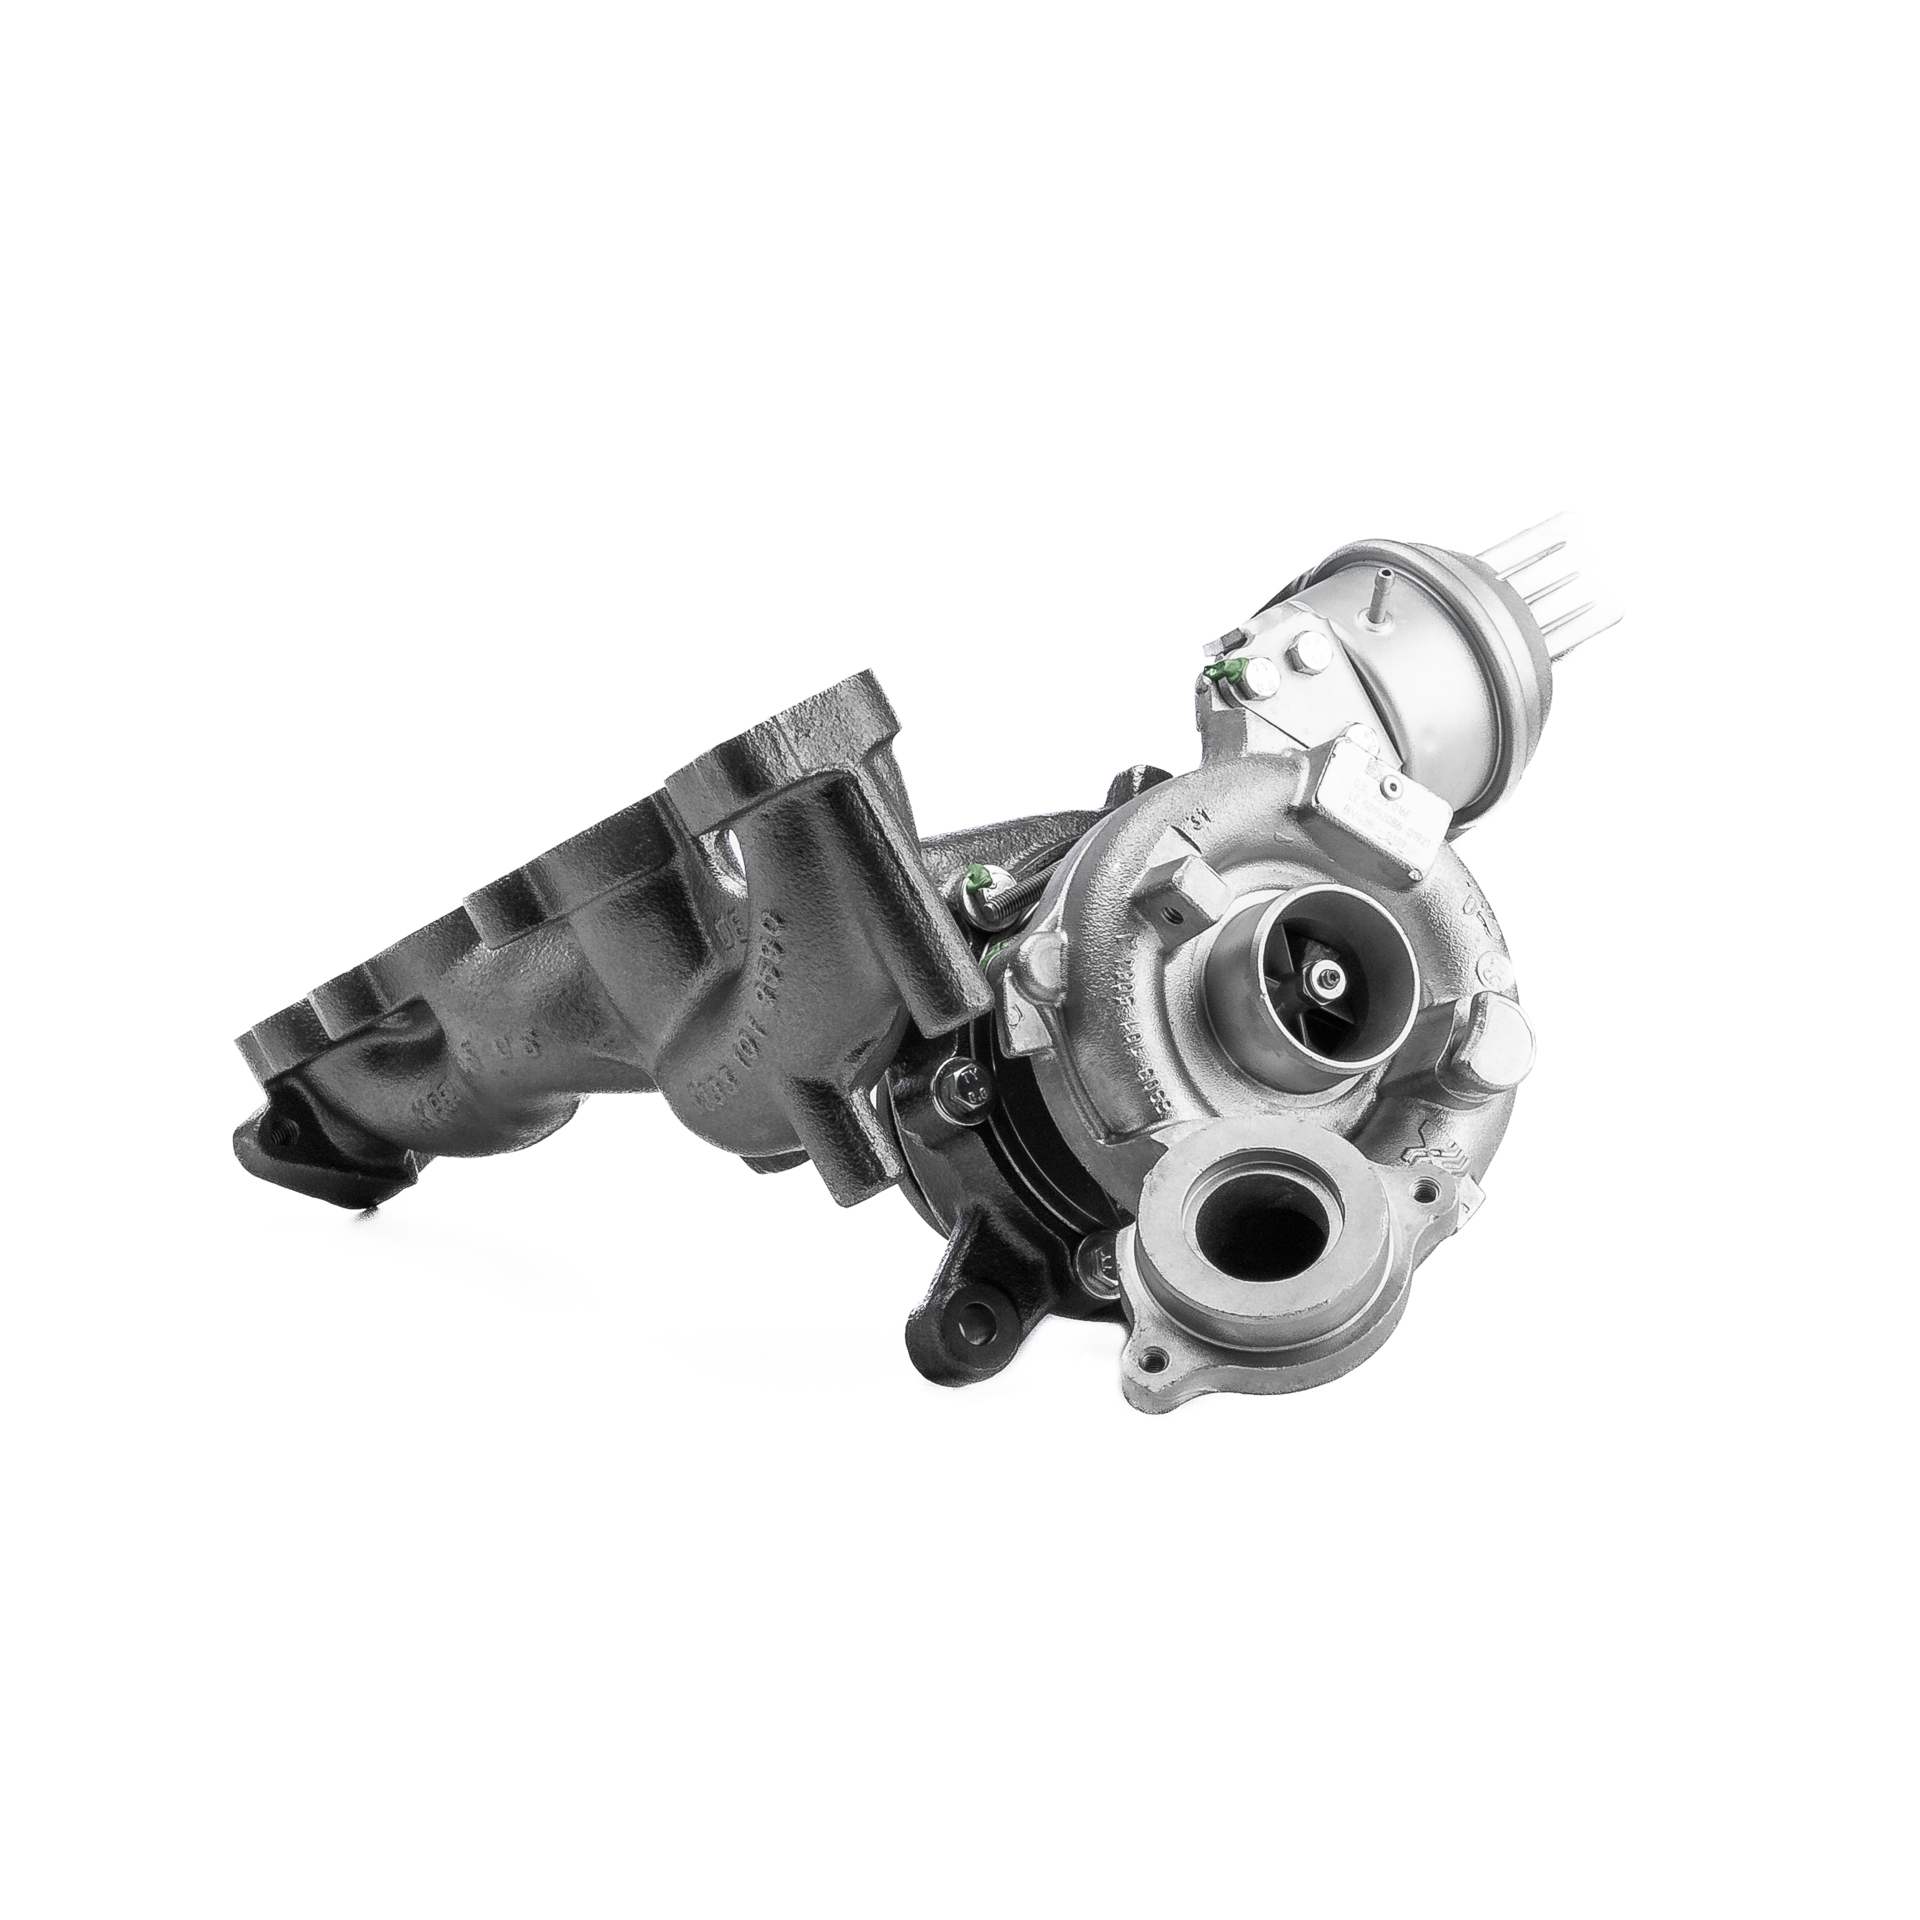 Skoda Turbocharger BR Turbo 53039880205RS at a good price